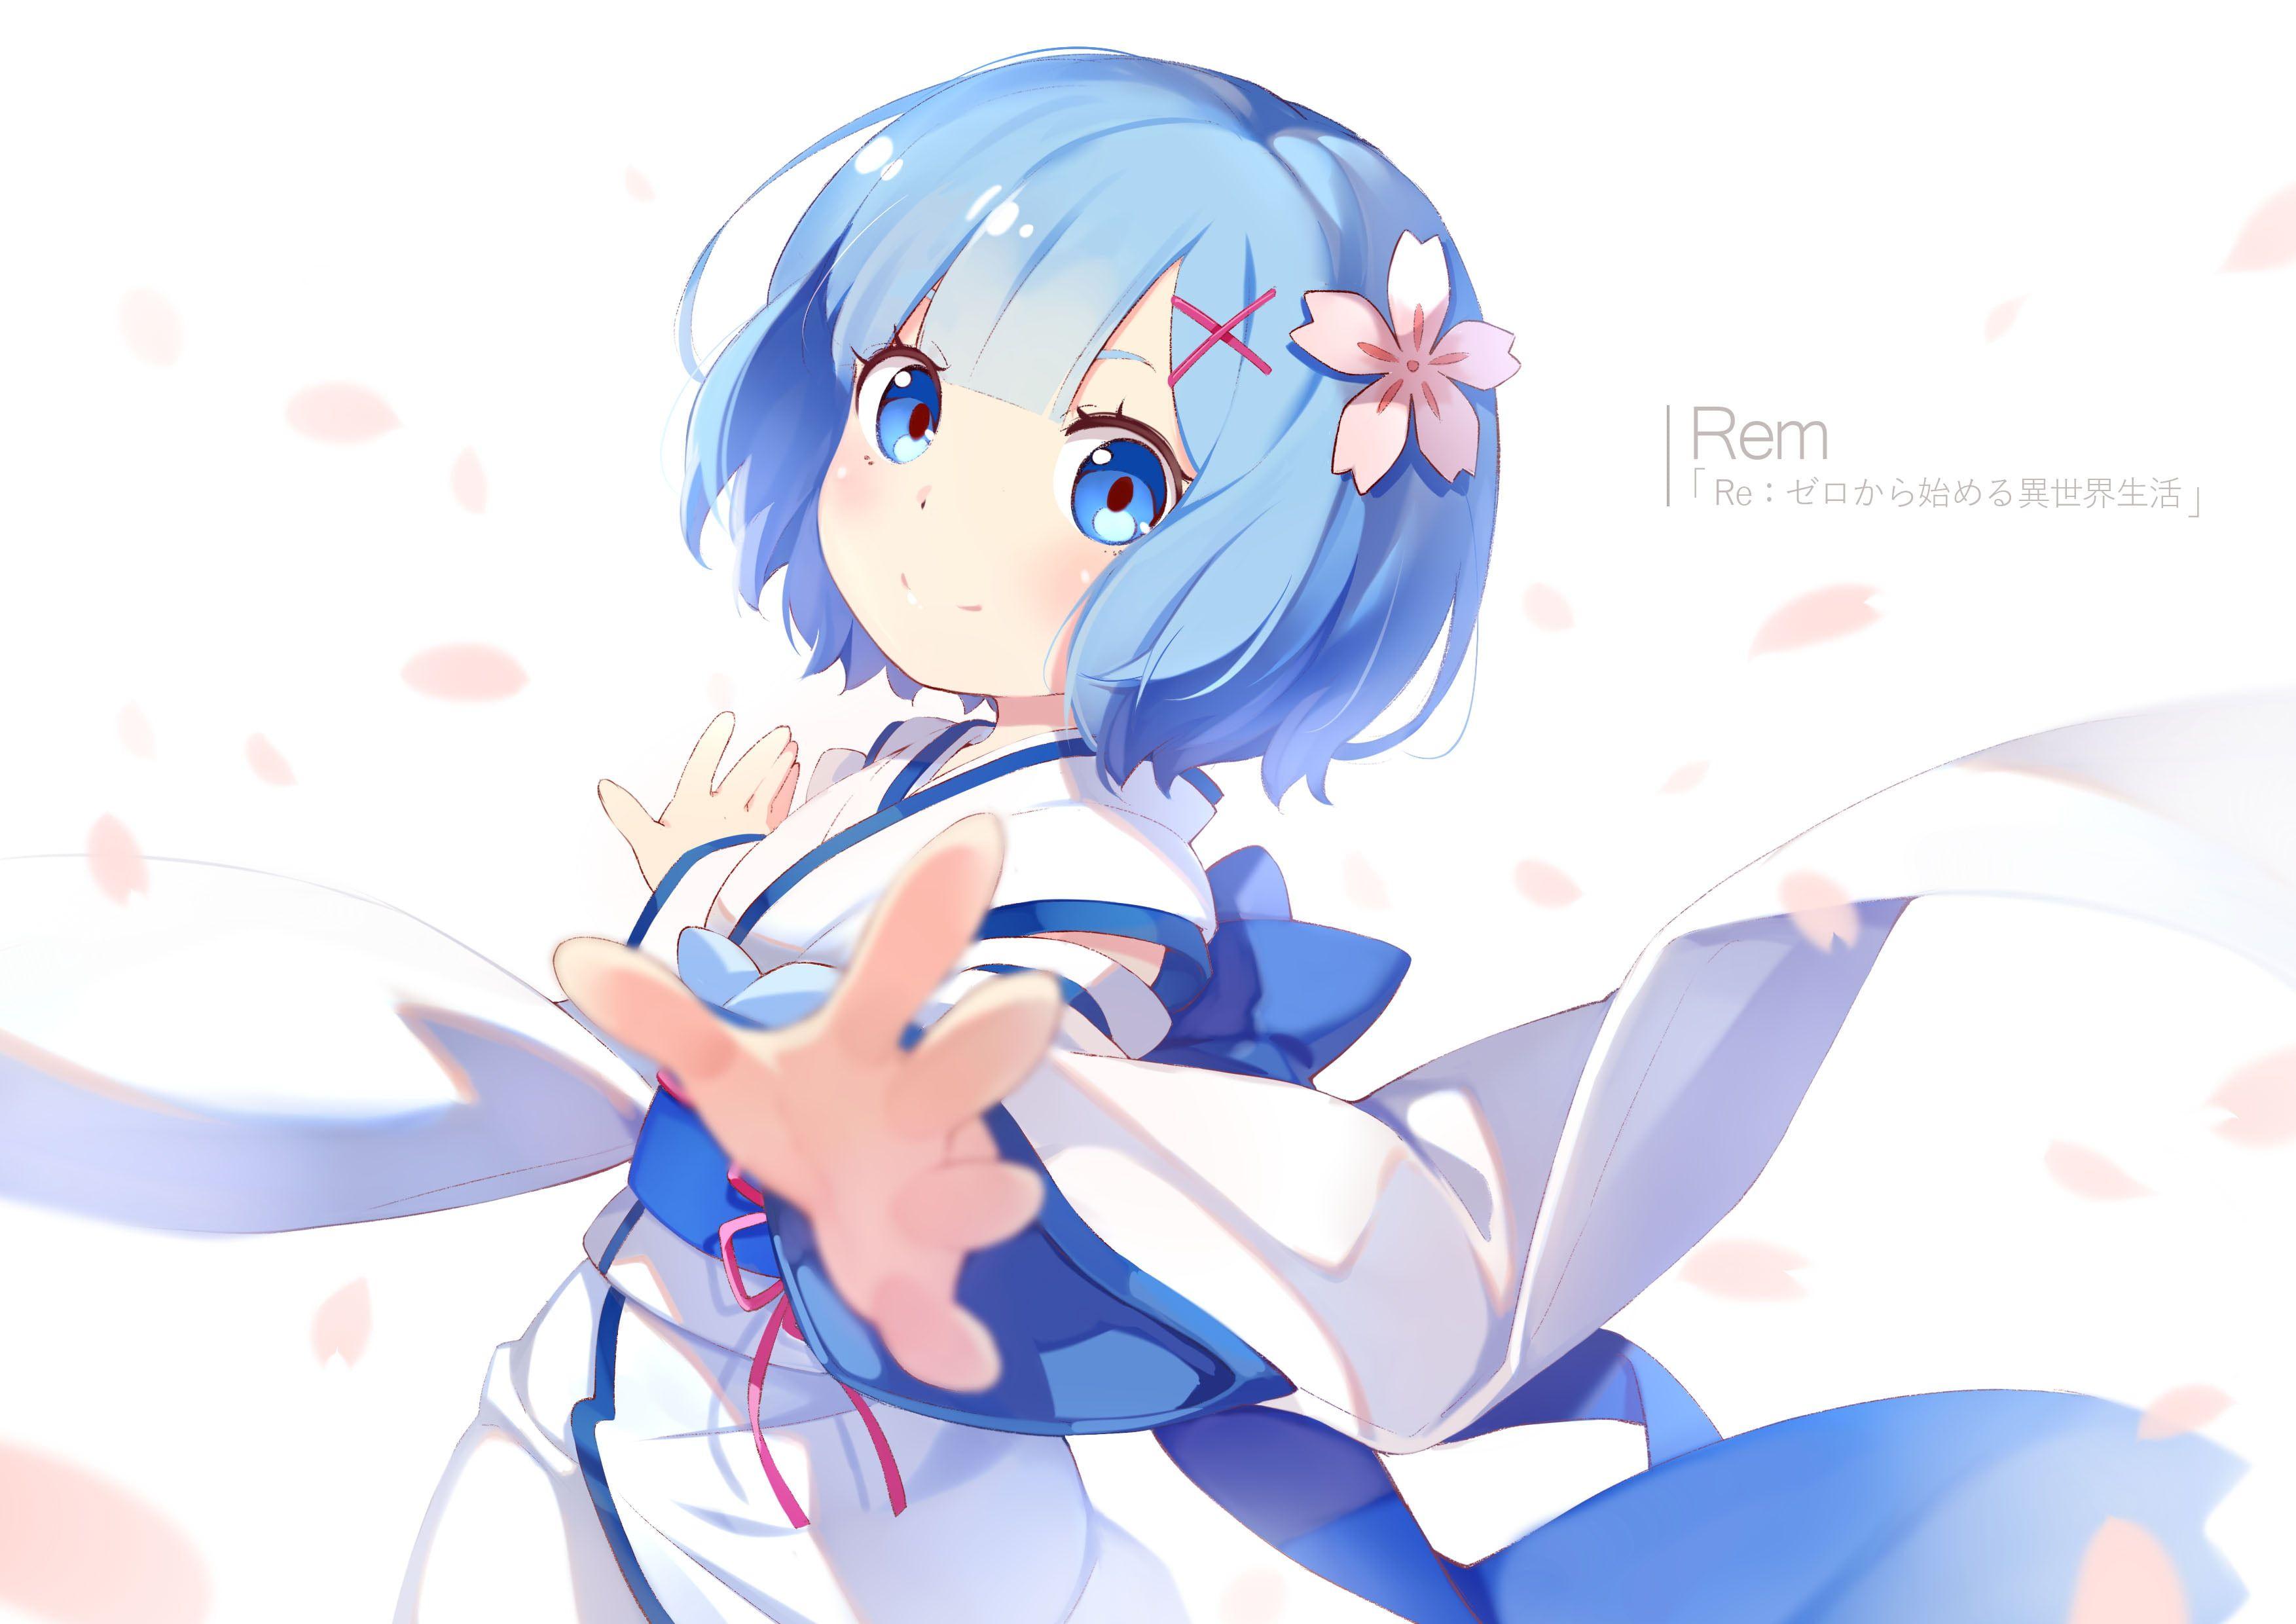 Rem ReZero Wallpaper for iPhone  Android by ElZenoval on DeviantArt